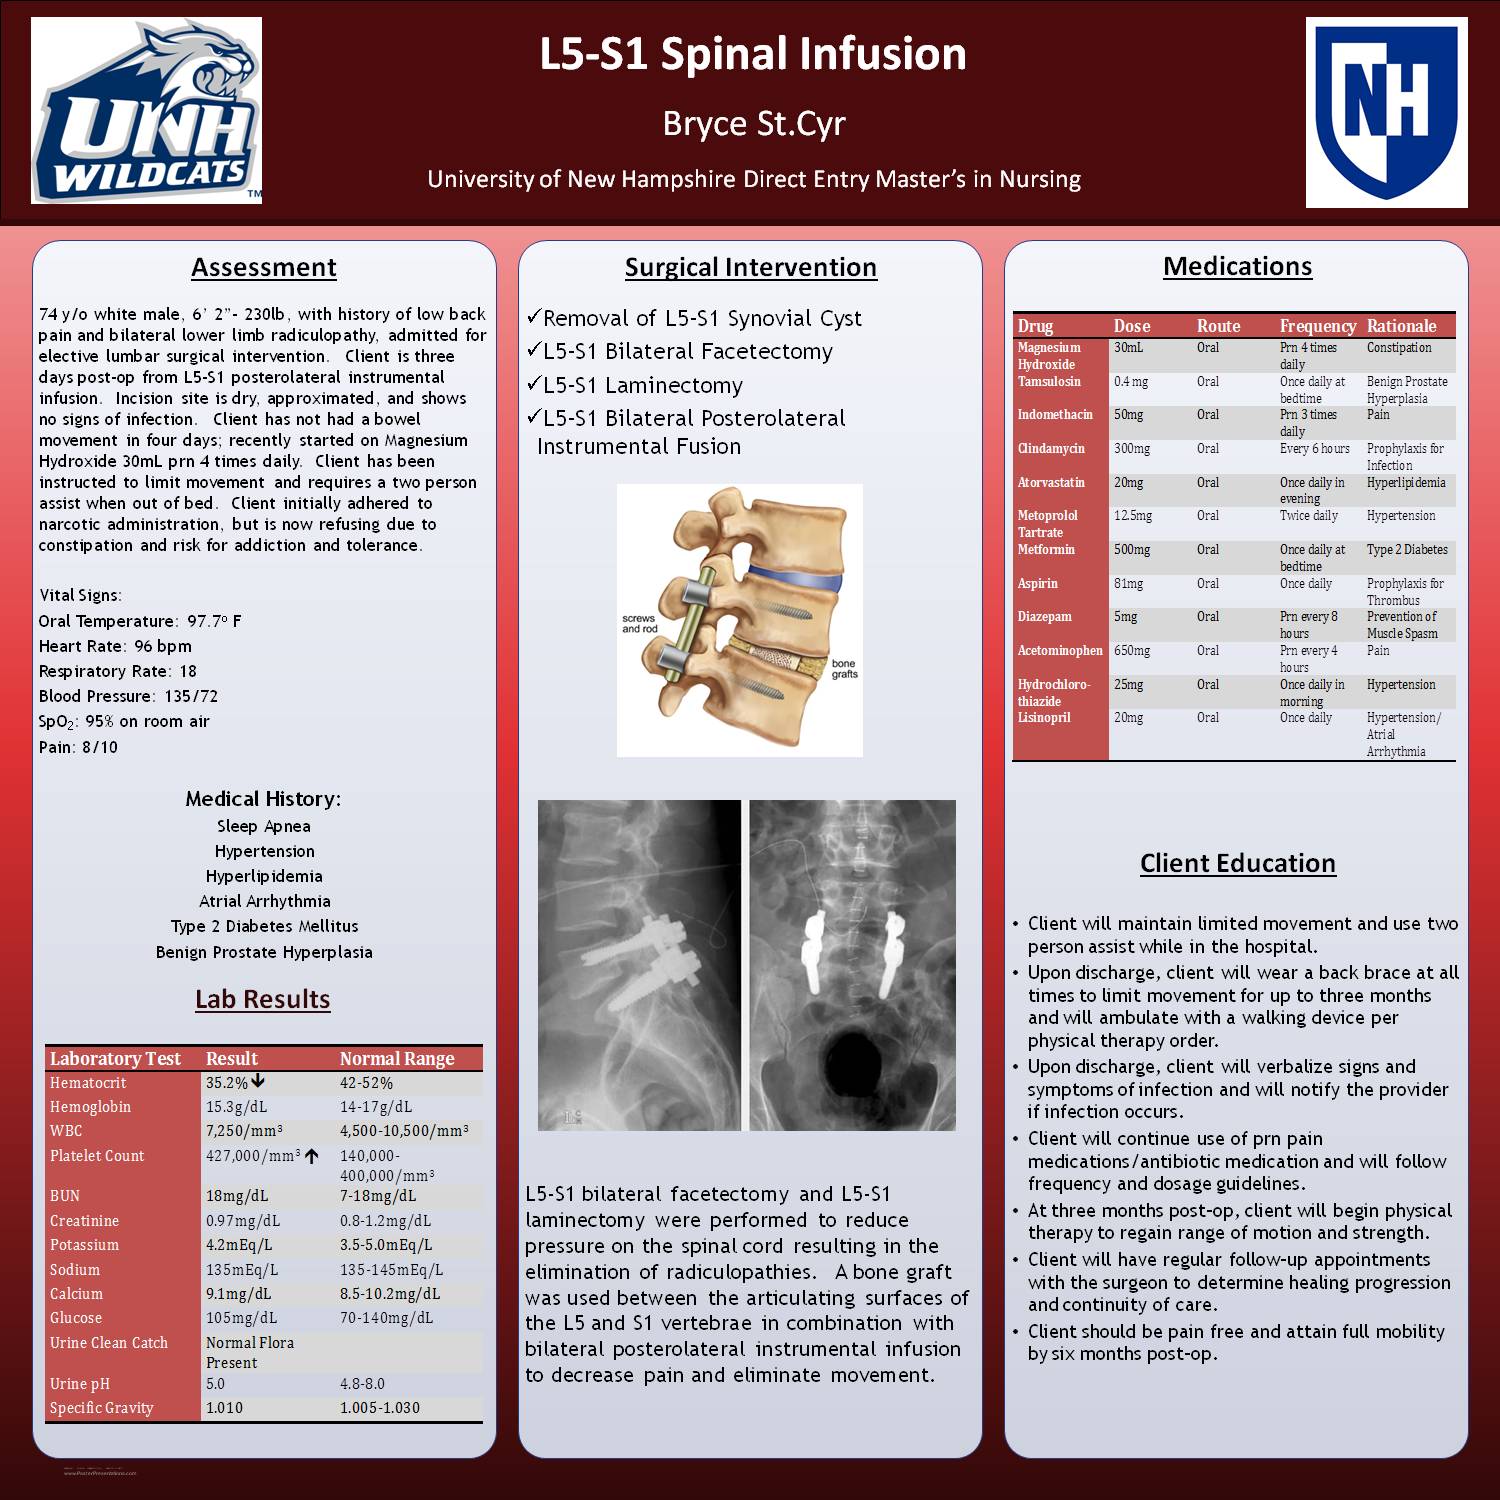 Case Study: L5-S1 Spinal Infusion by bac36